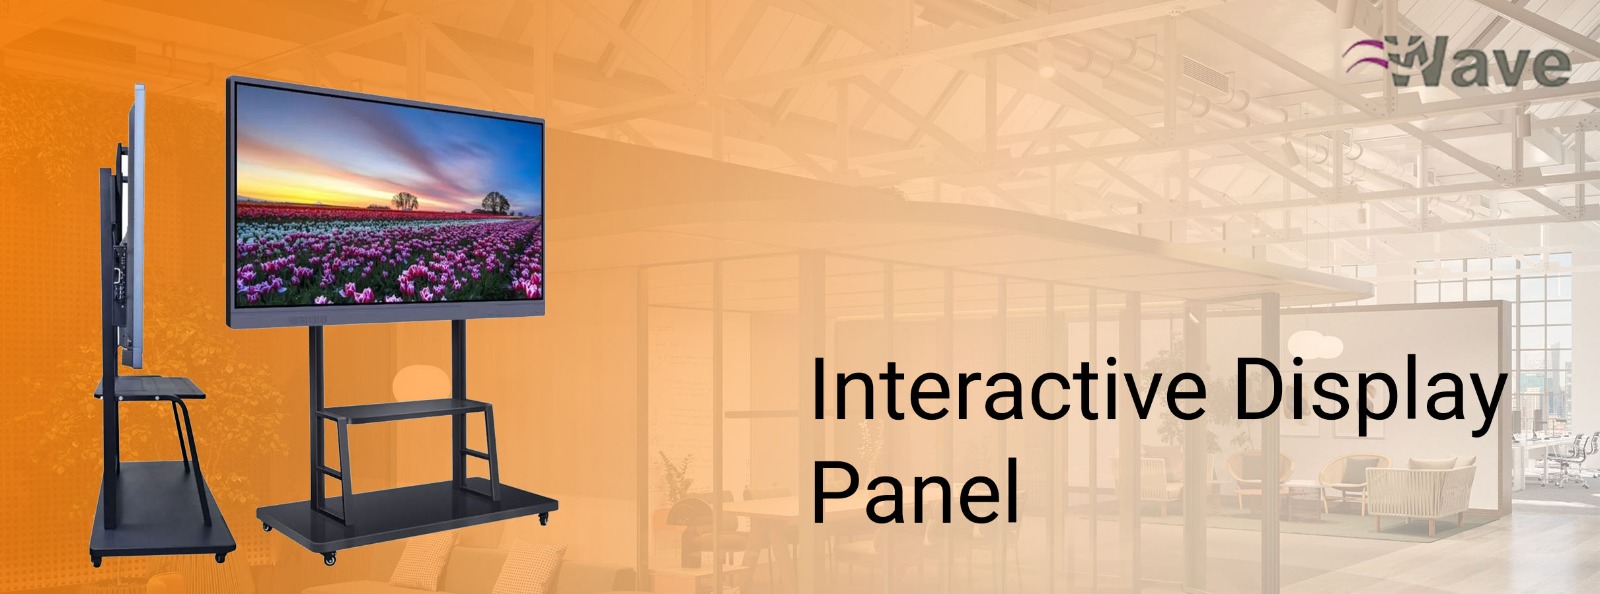 5 Essential Factors to Consider When Choosing Commercial Display Panels